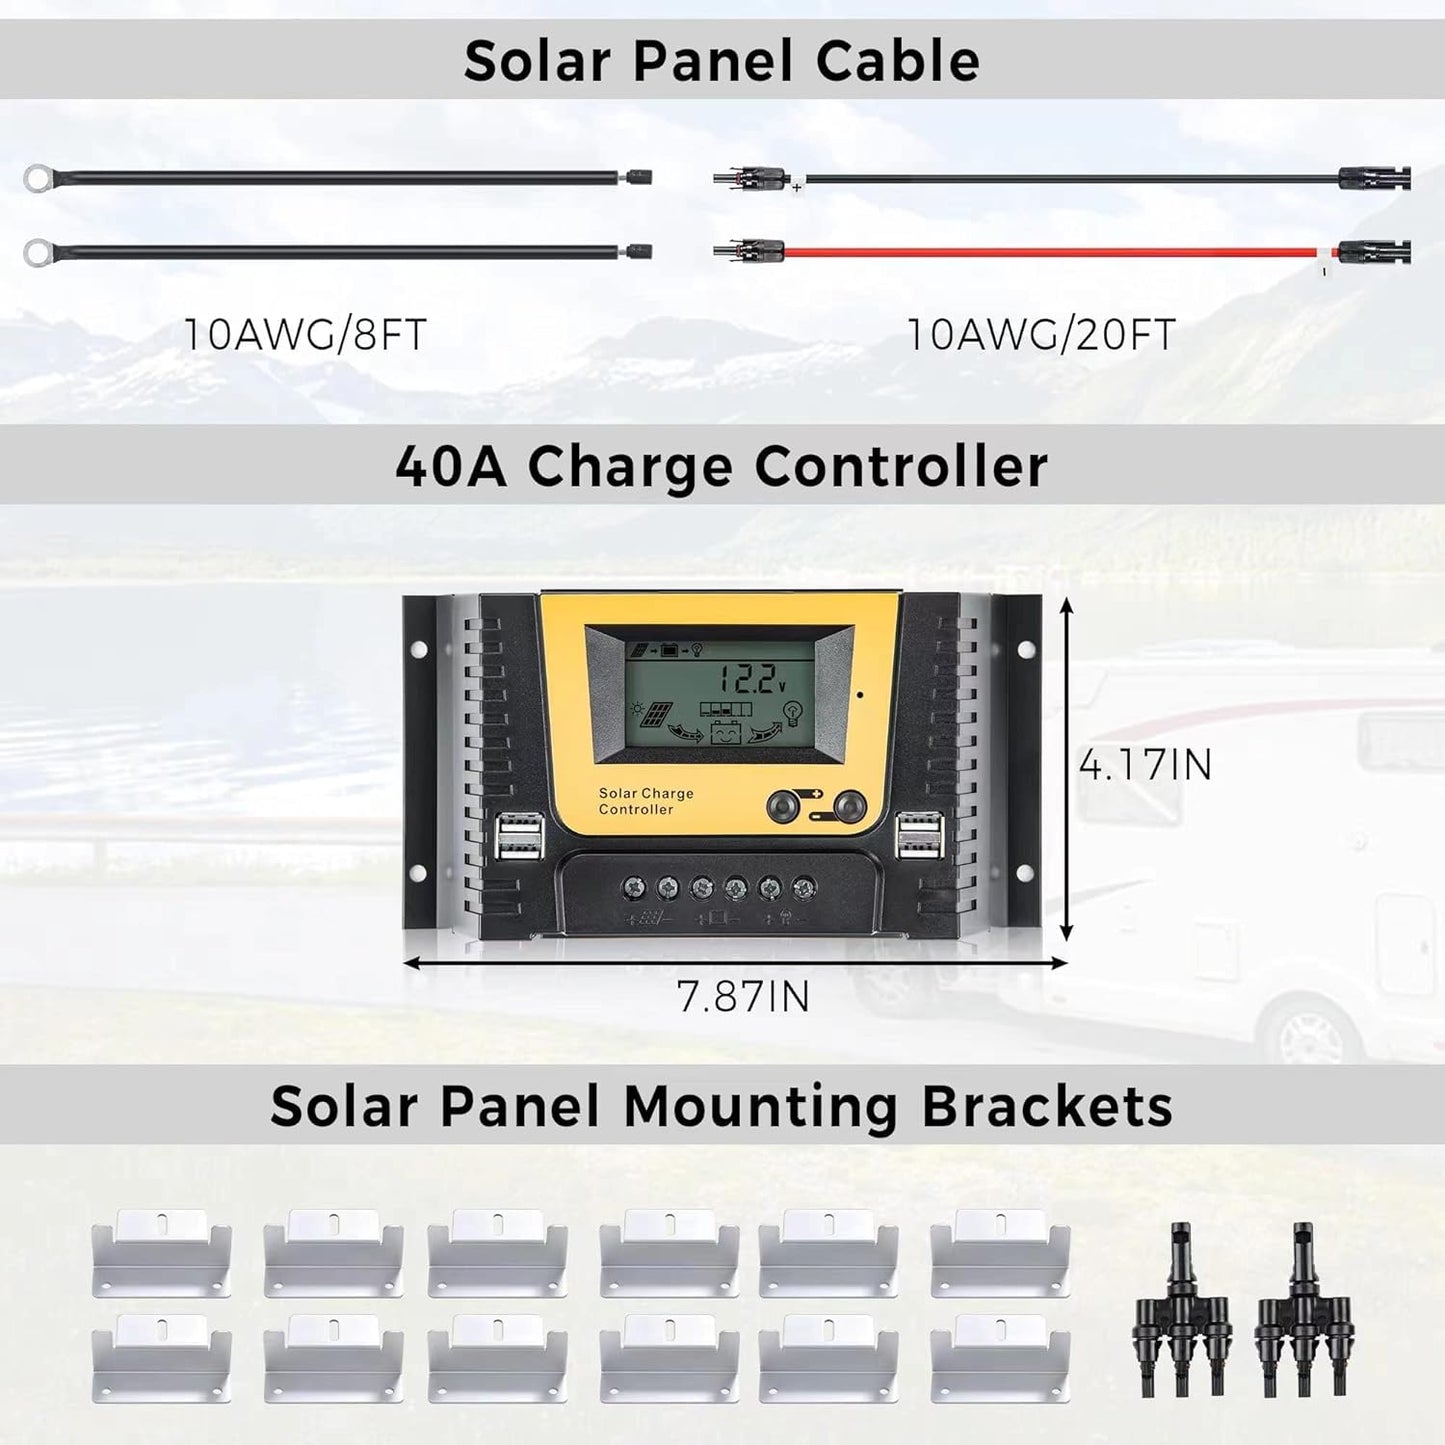 300W 12V Solar Panel Kit for RV, Trailer, Camper, Marine, Off Grid| 3pcs 100W Solar Panel, 40A PWM Solar Charge Controller,100Ah Lithium Battery + 1100W Power Inverter